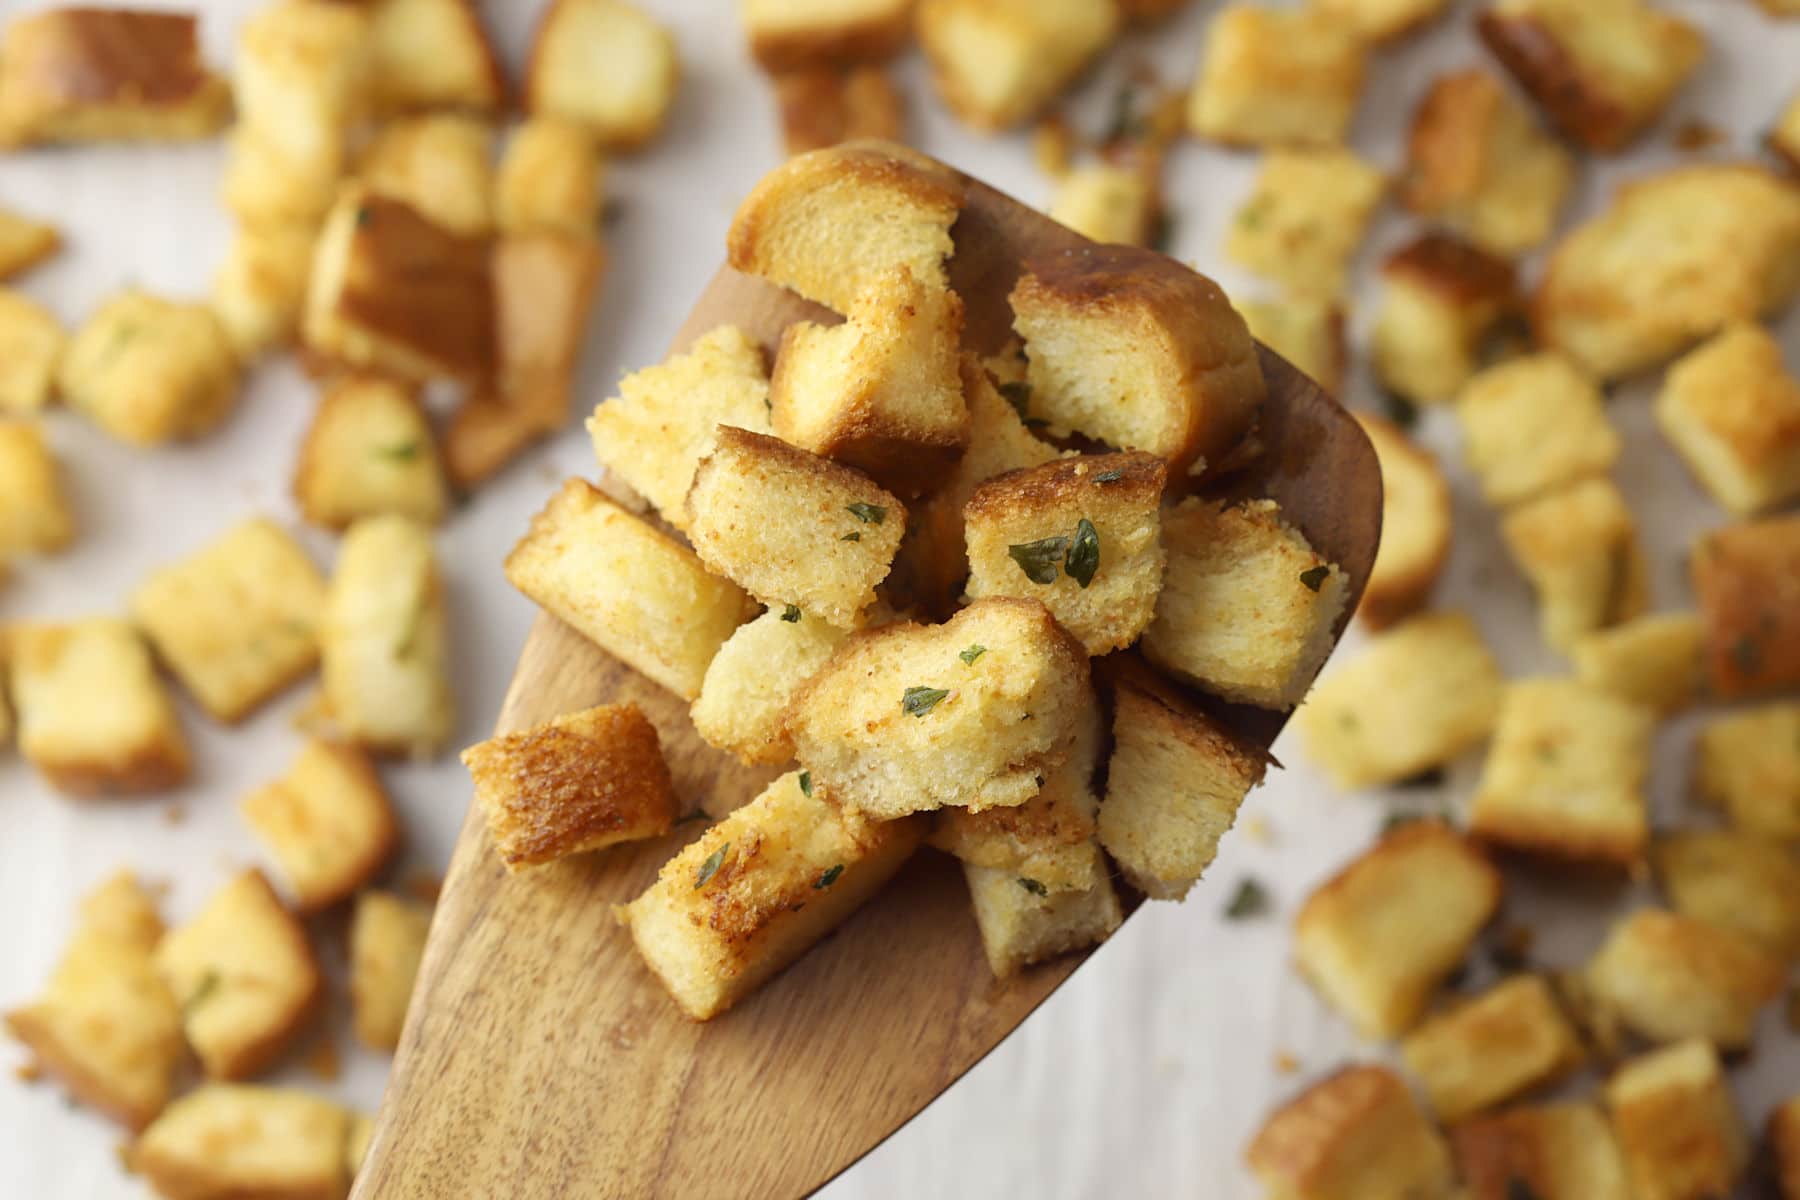 Wooden spatula scooping croutons from a baking sheet.